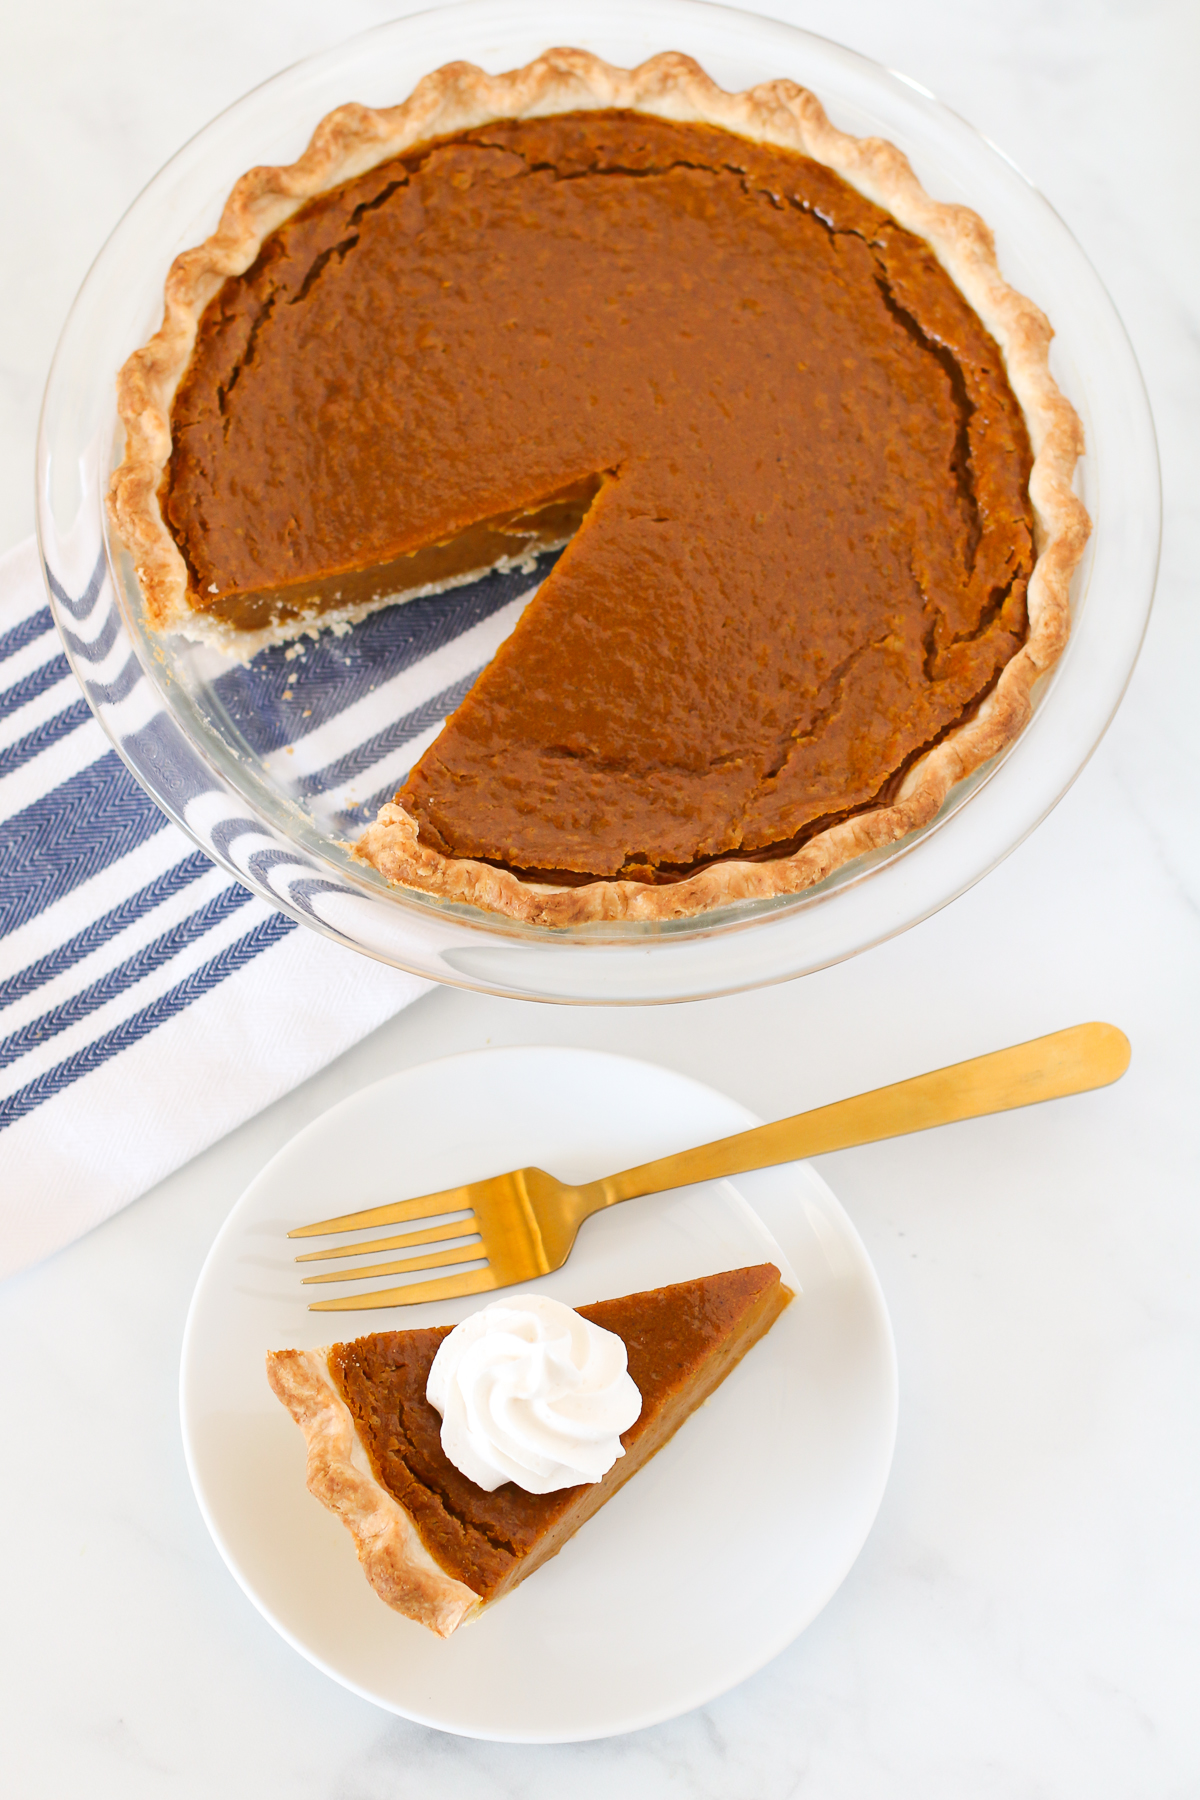 Gluten Free Vegan Pumpkin Pie. Flakey pie crust with a creamy, perfectly spiced pumpkin filling. This pumpkin pie is suitable for any holiday gathering!